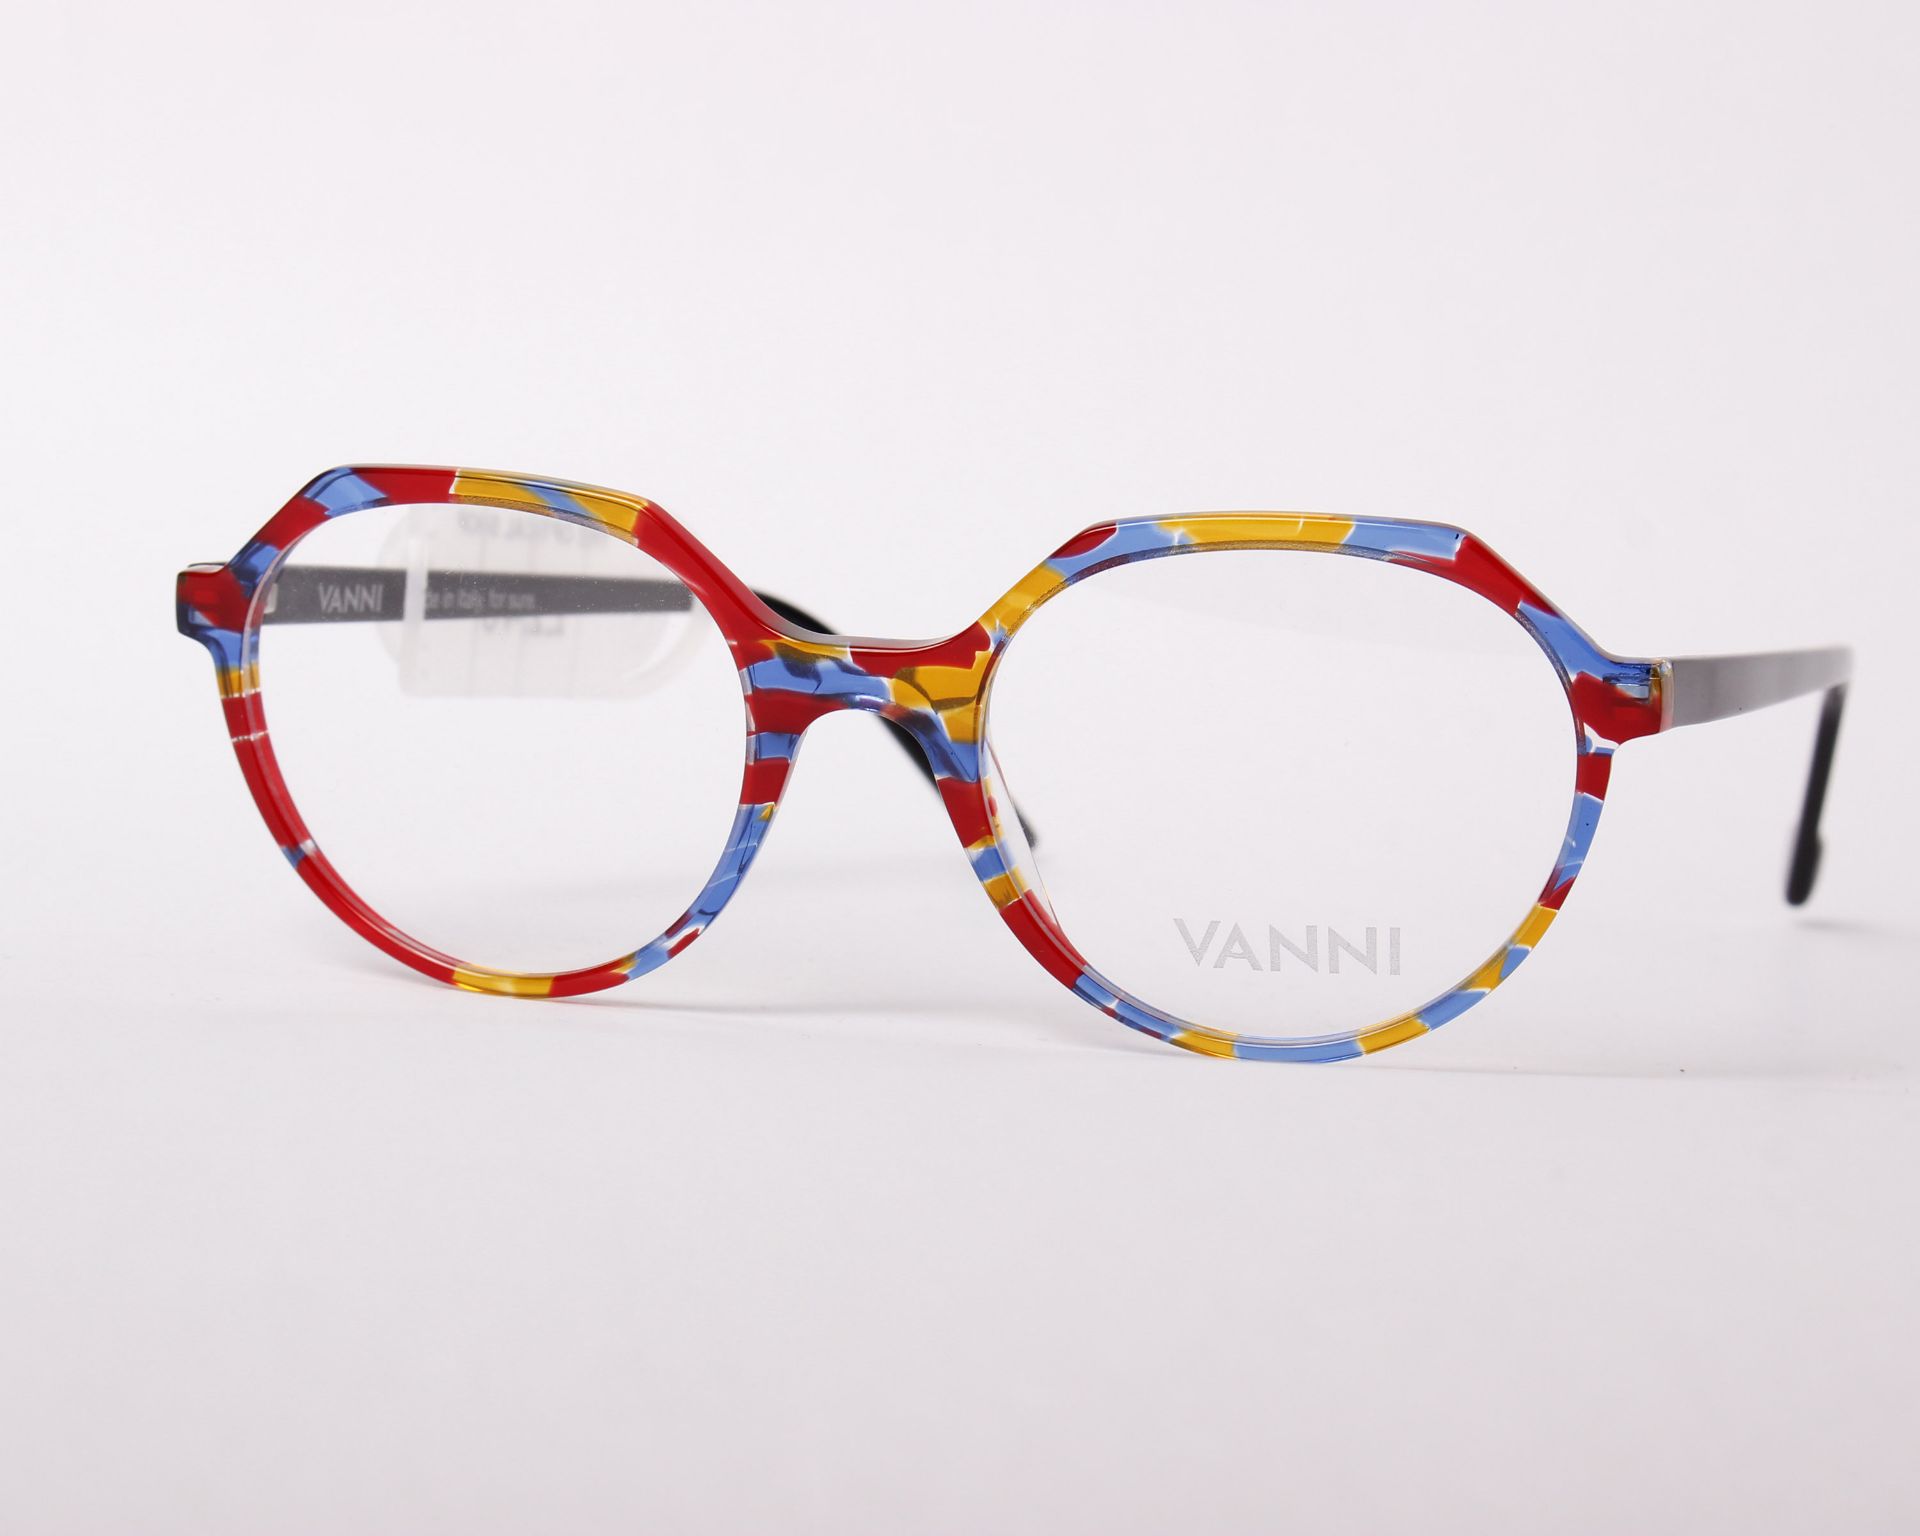 A pair of as new Vanni glasses frames with clear glass (RRP £240). - Image 3 of 3